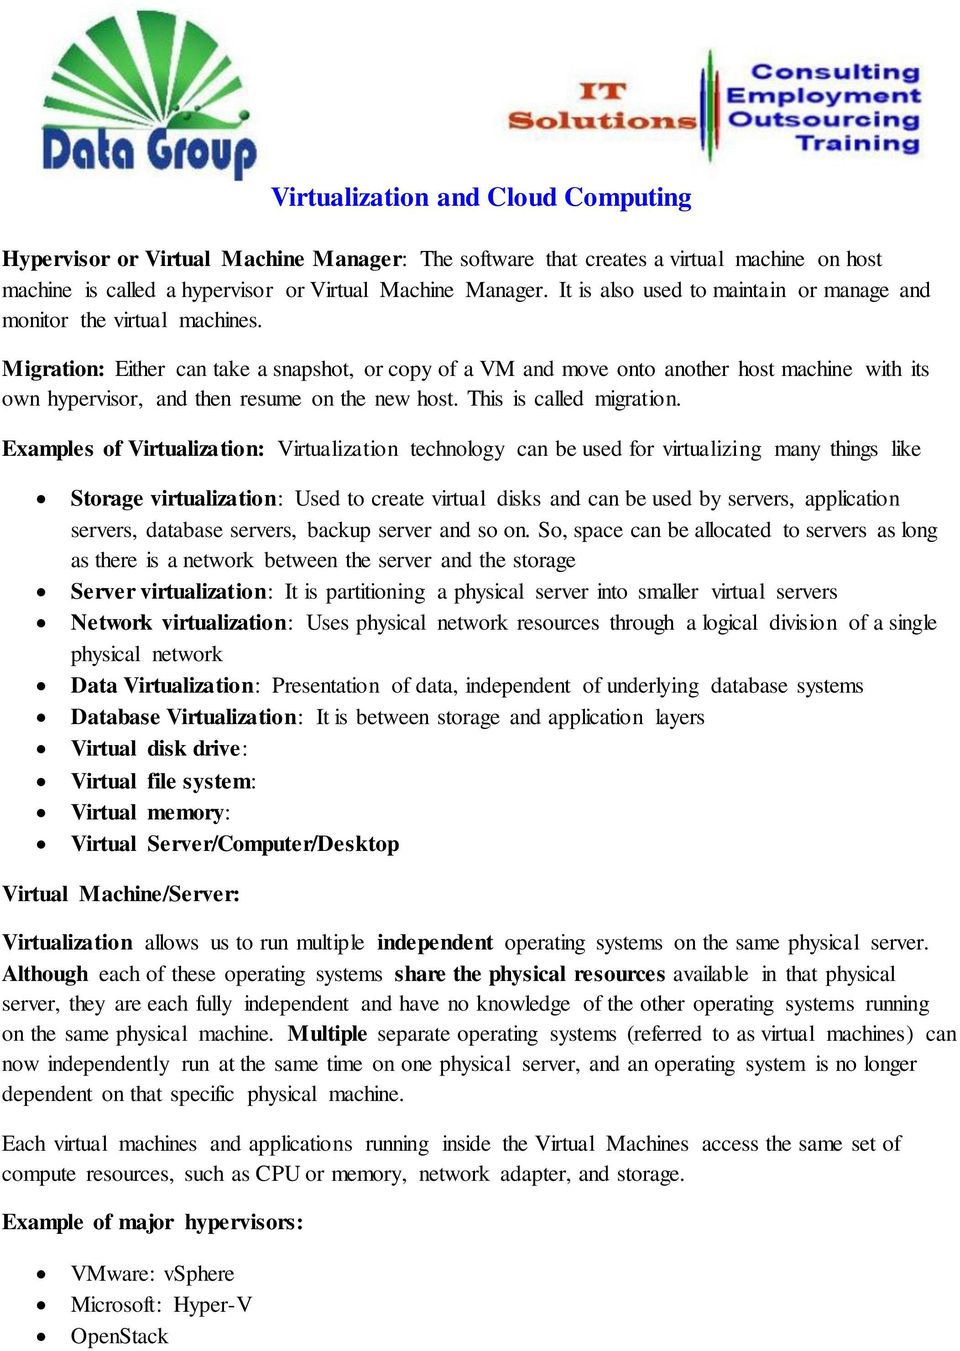 Migration: Either can take a snapshot, or copy of a VM and move onto another host machine with its own hypervisor, and then resume on the new host. This is called migration.